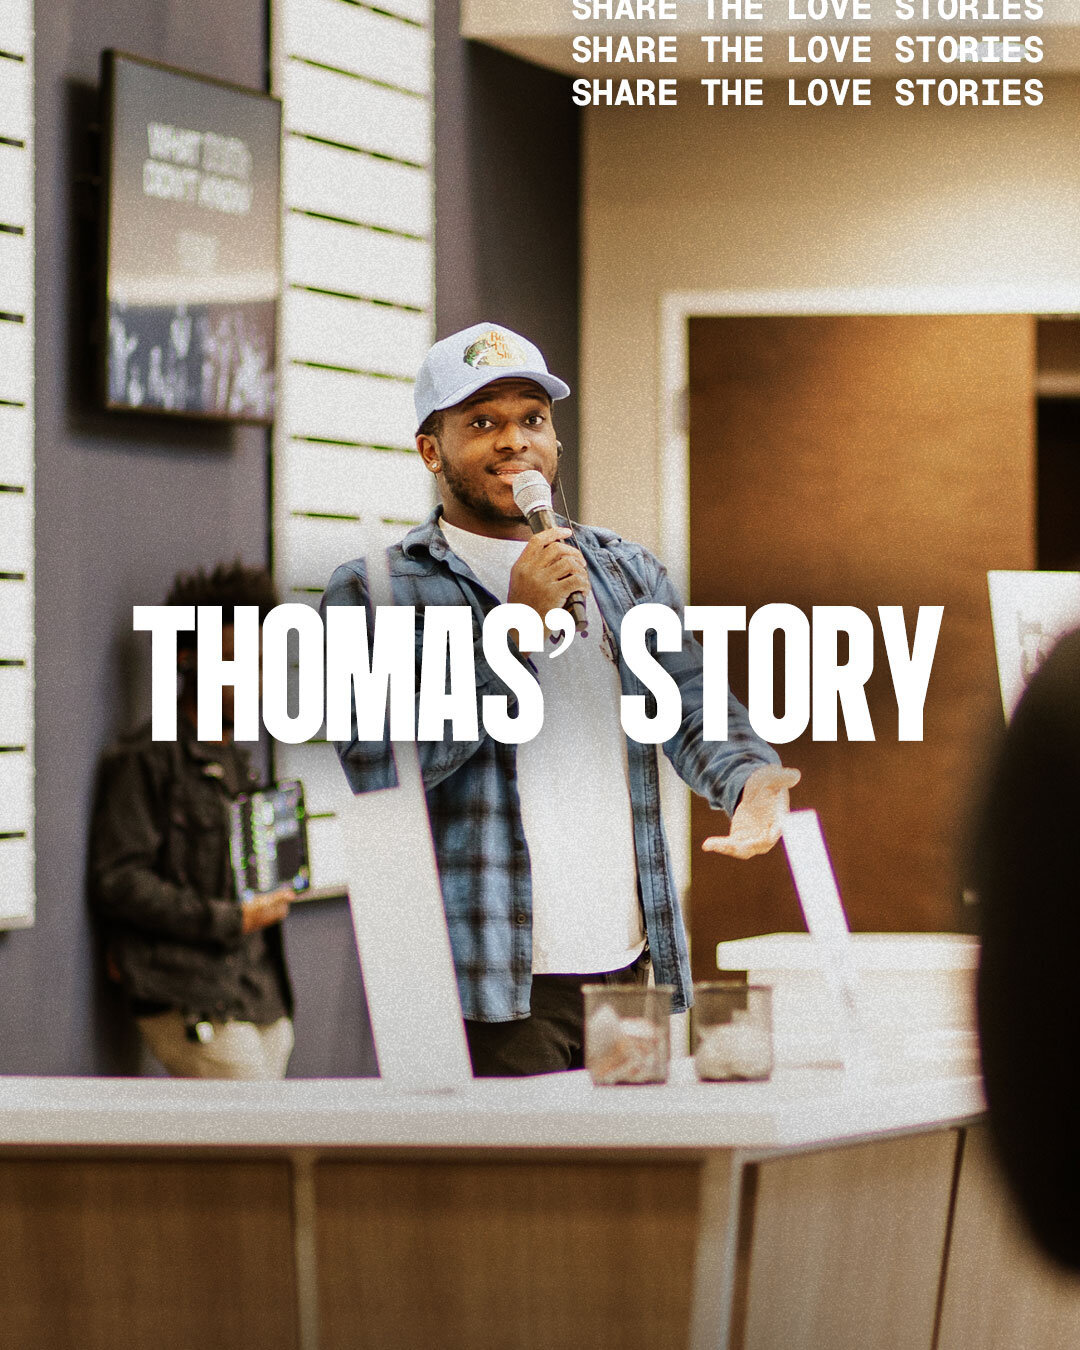 Thomas came to be a part of In Focus through God reaching him on the campus of Augusta University.
ㅤ
His story is one of powerful life change and inspiring transformation.
ㅤ
We are grateful fo the ways that God has worked in his life and continues to